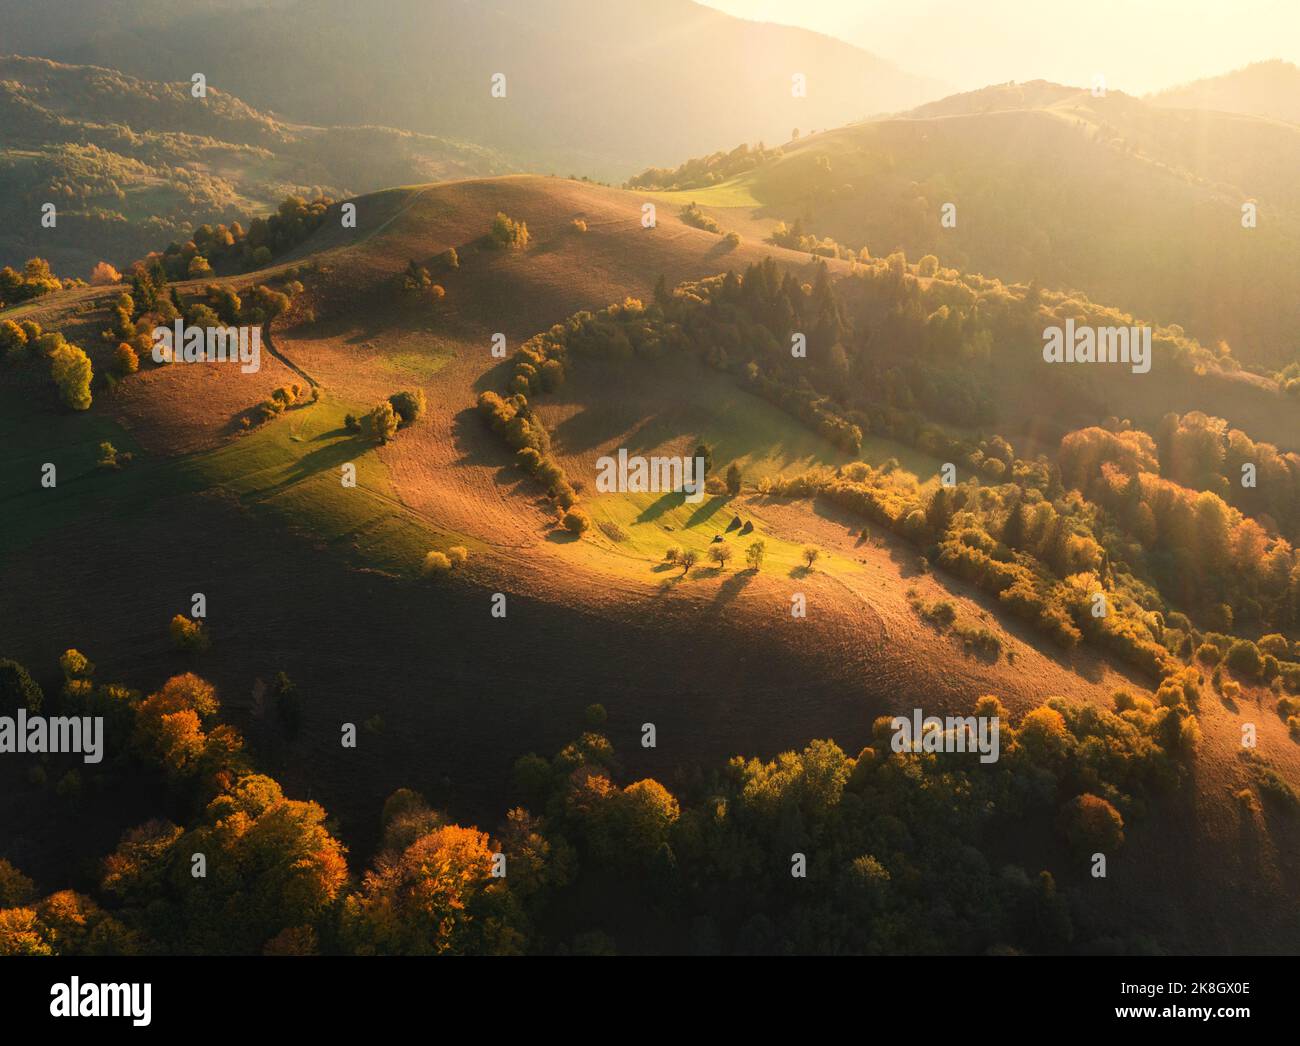 Aerial view of orange trees on the hills and mountains in fog Stock Photo